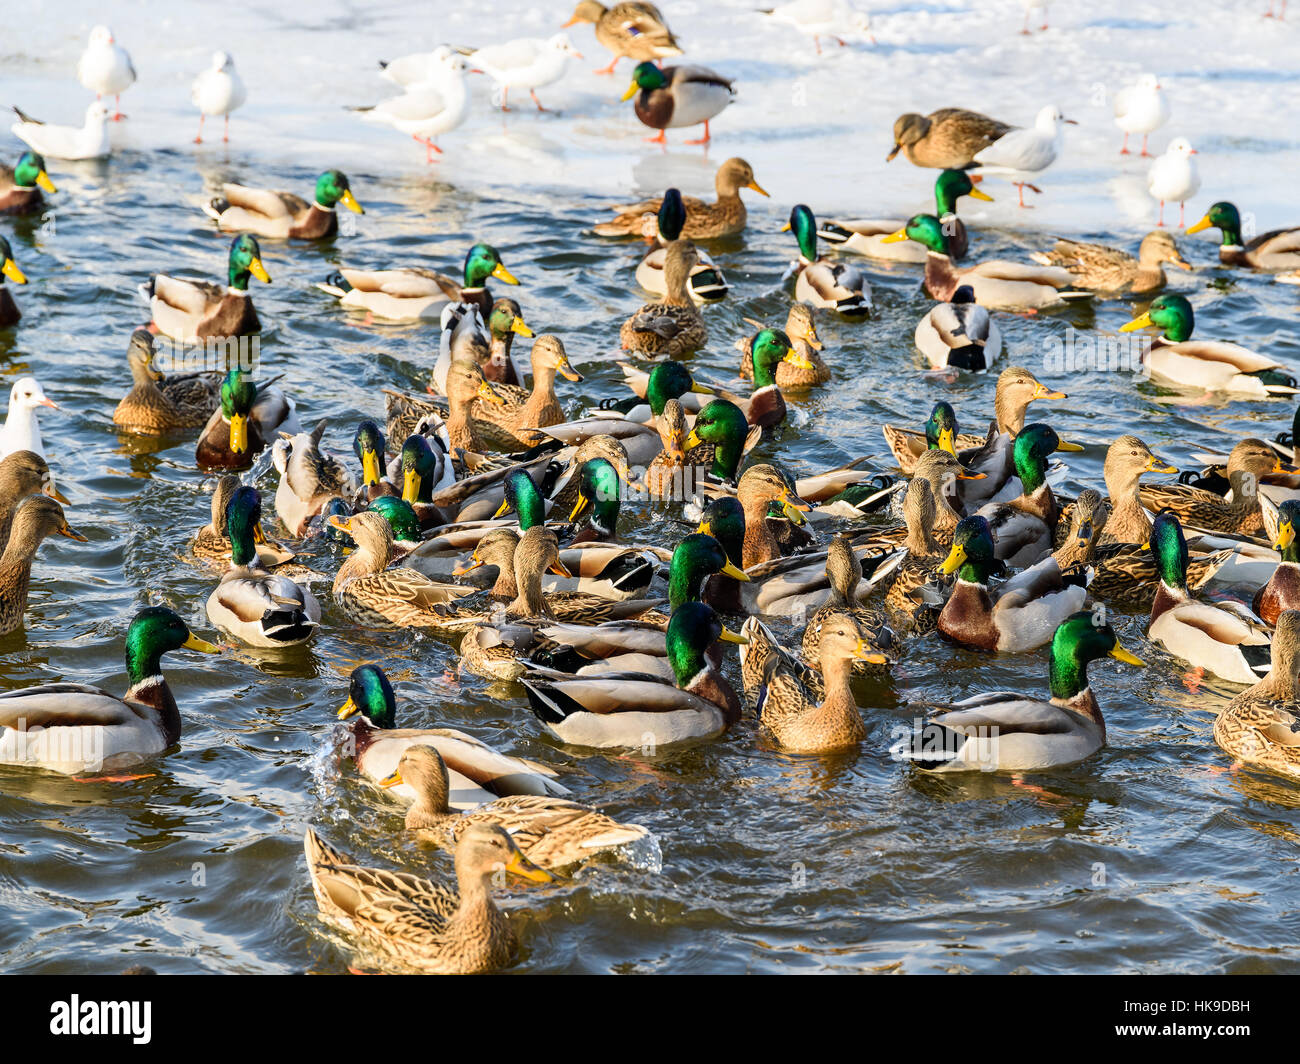 Wild Ducks And Seagulls On Water In Winter Stock Photo